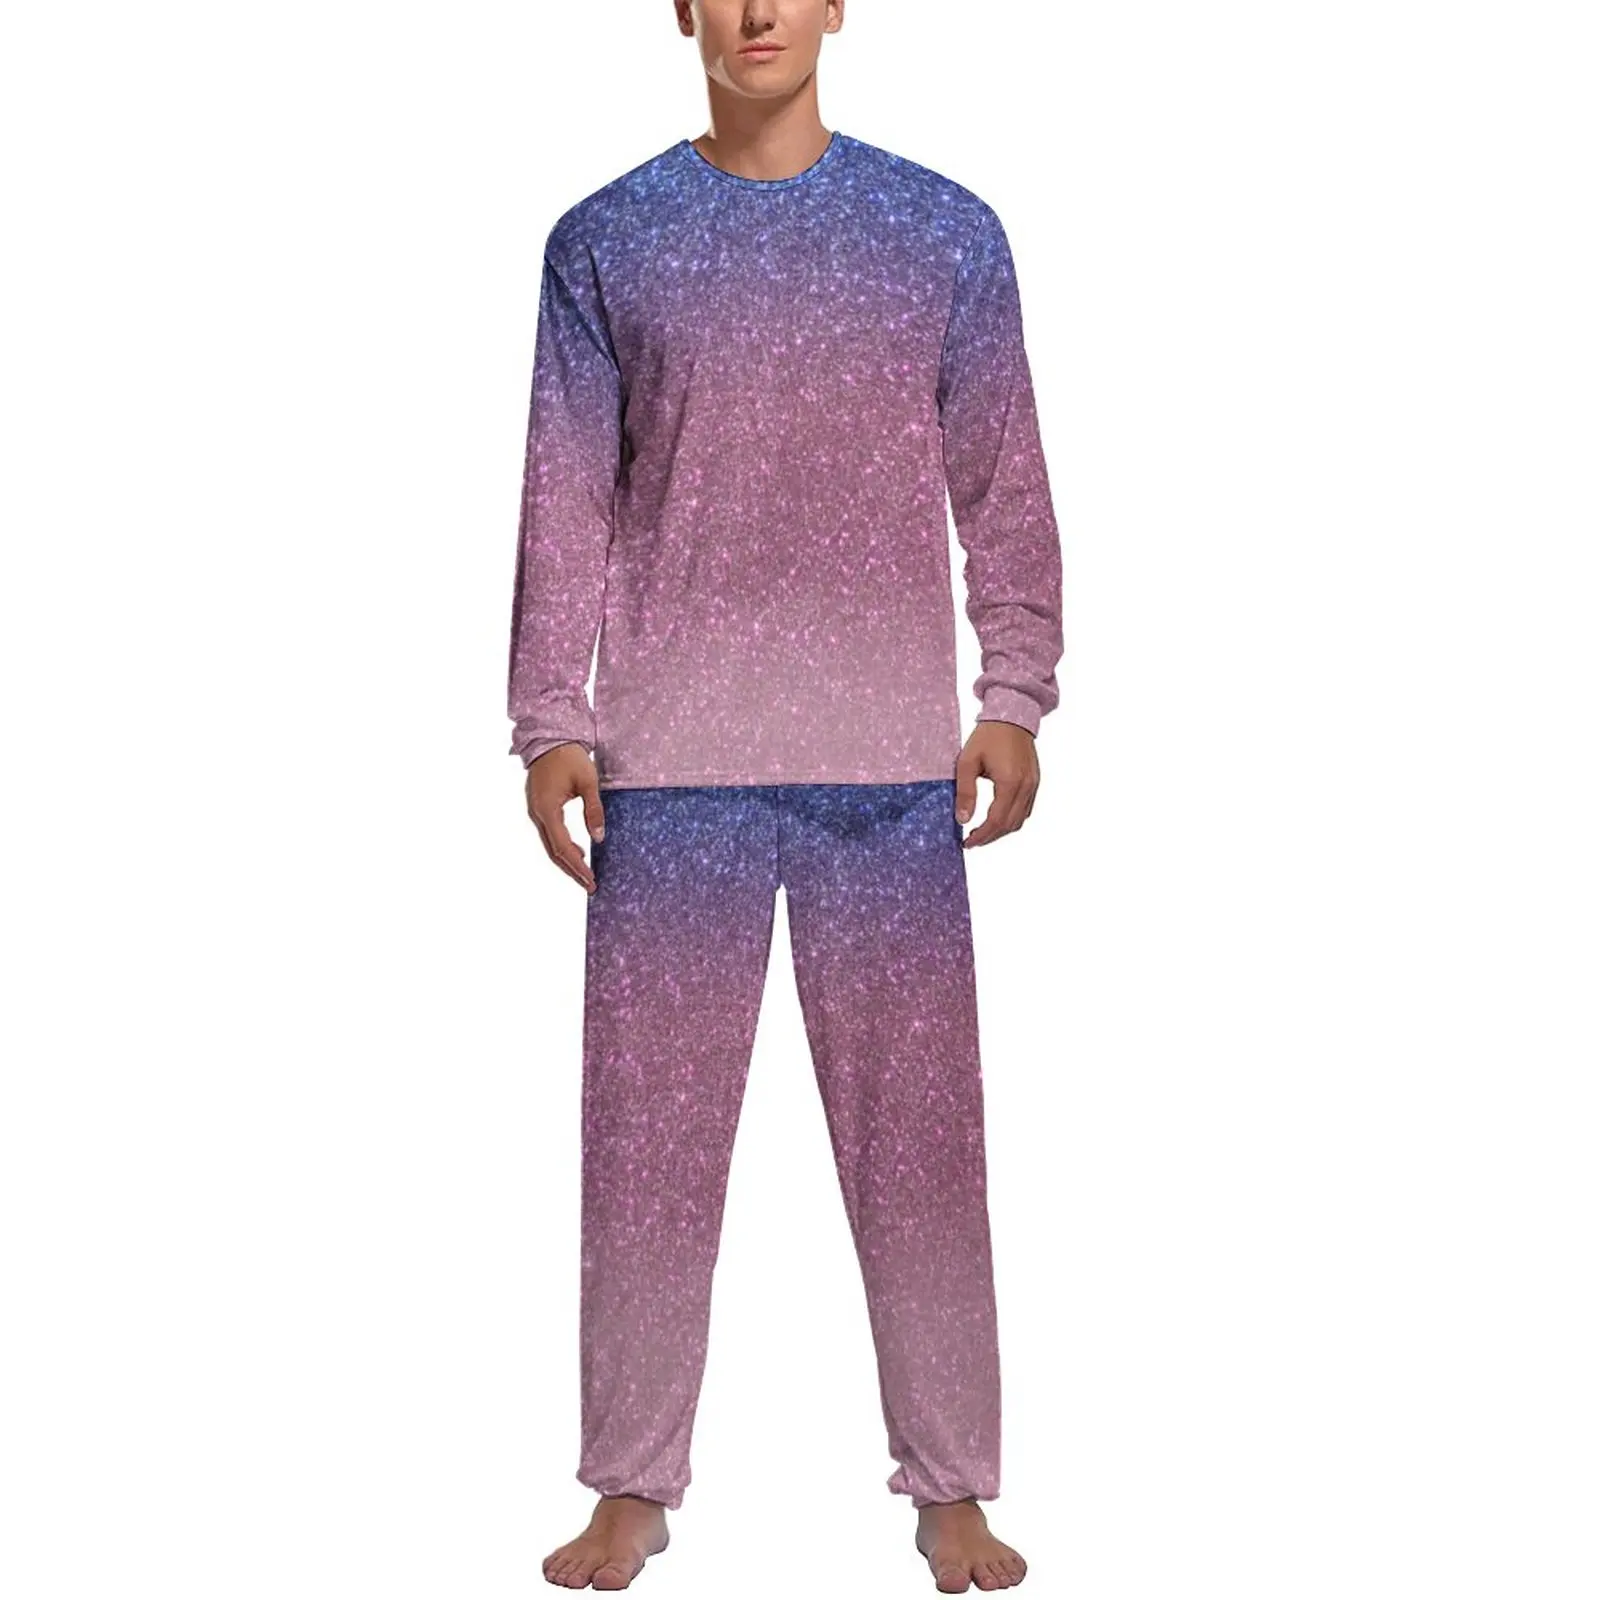 Glitter Ombre Pirnt Pajamas Autumn 2 Pieces Blue Pink Sparkly Lovely Pajama Sets Men Long Sleeve Casual Design Sleepwear